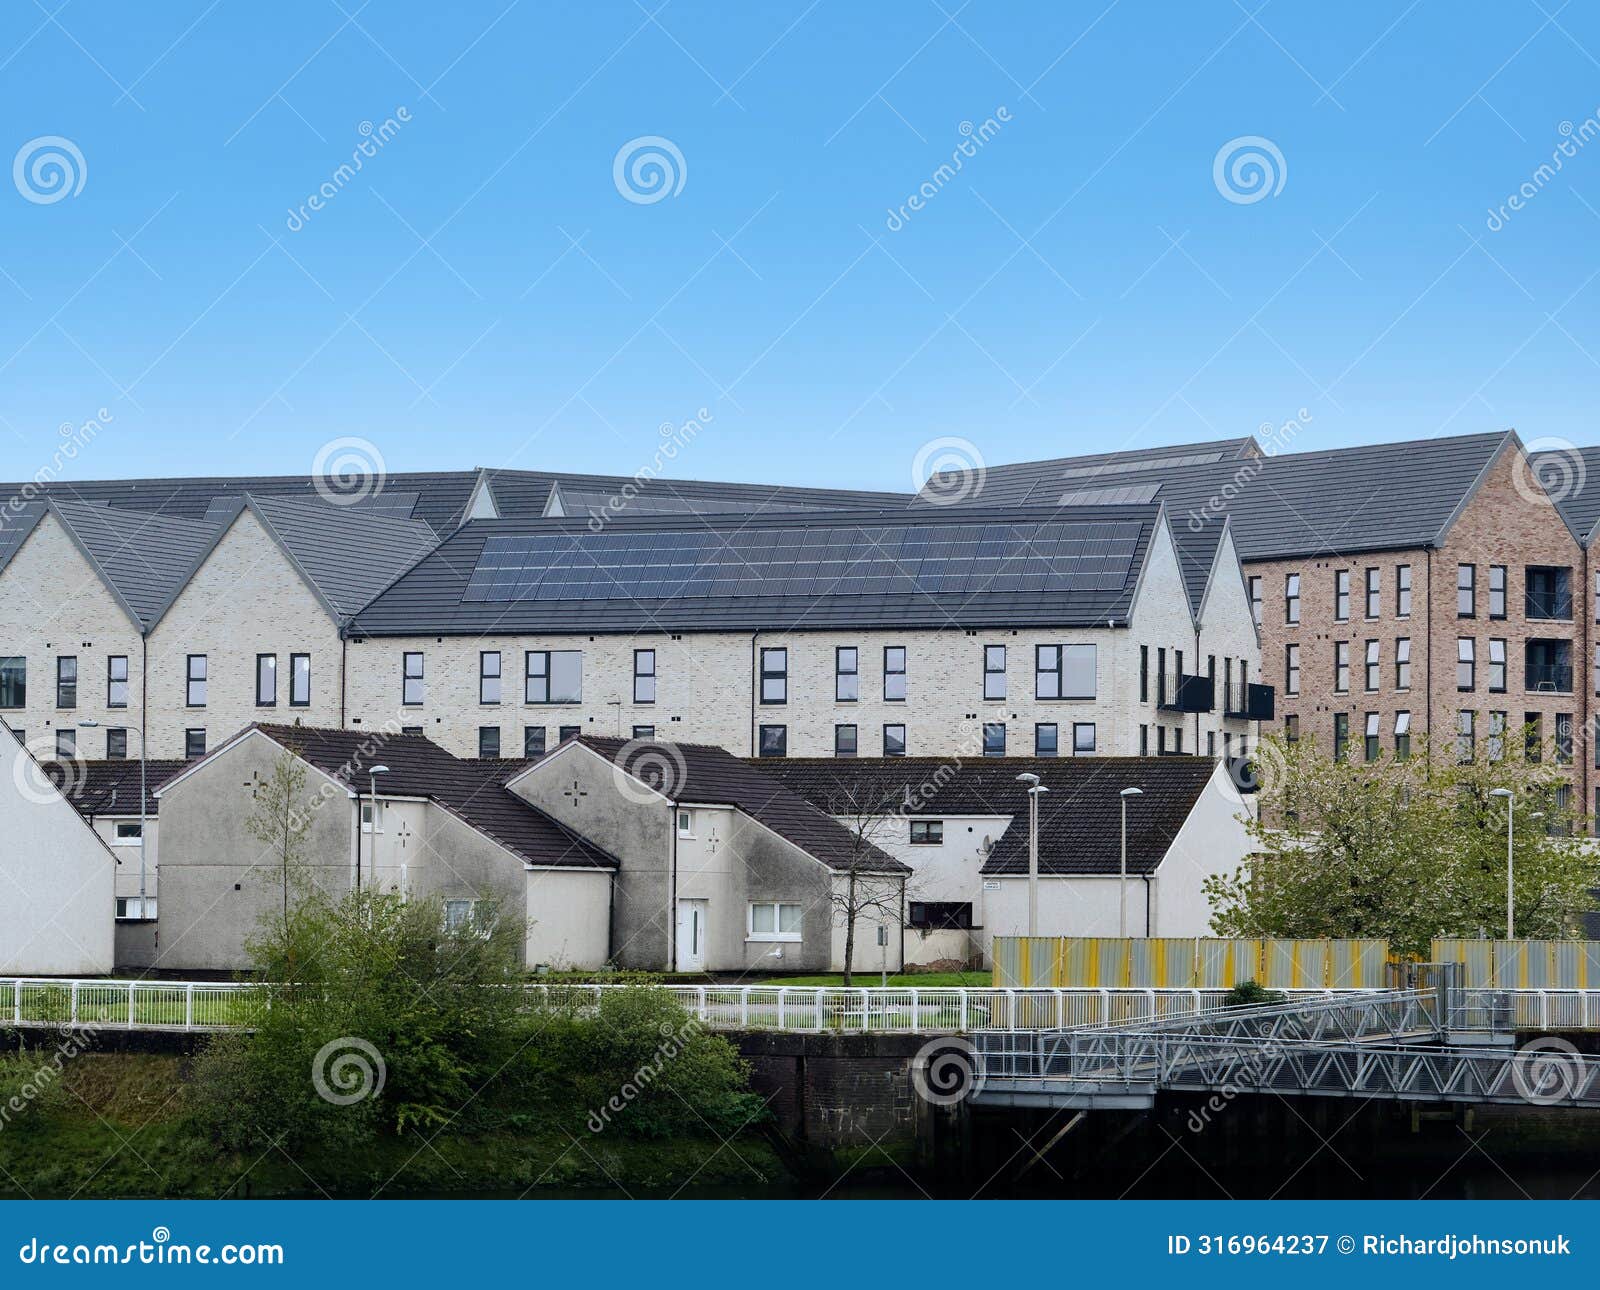 modern flats built next to old council houses in govan by the river clyde